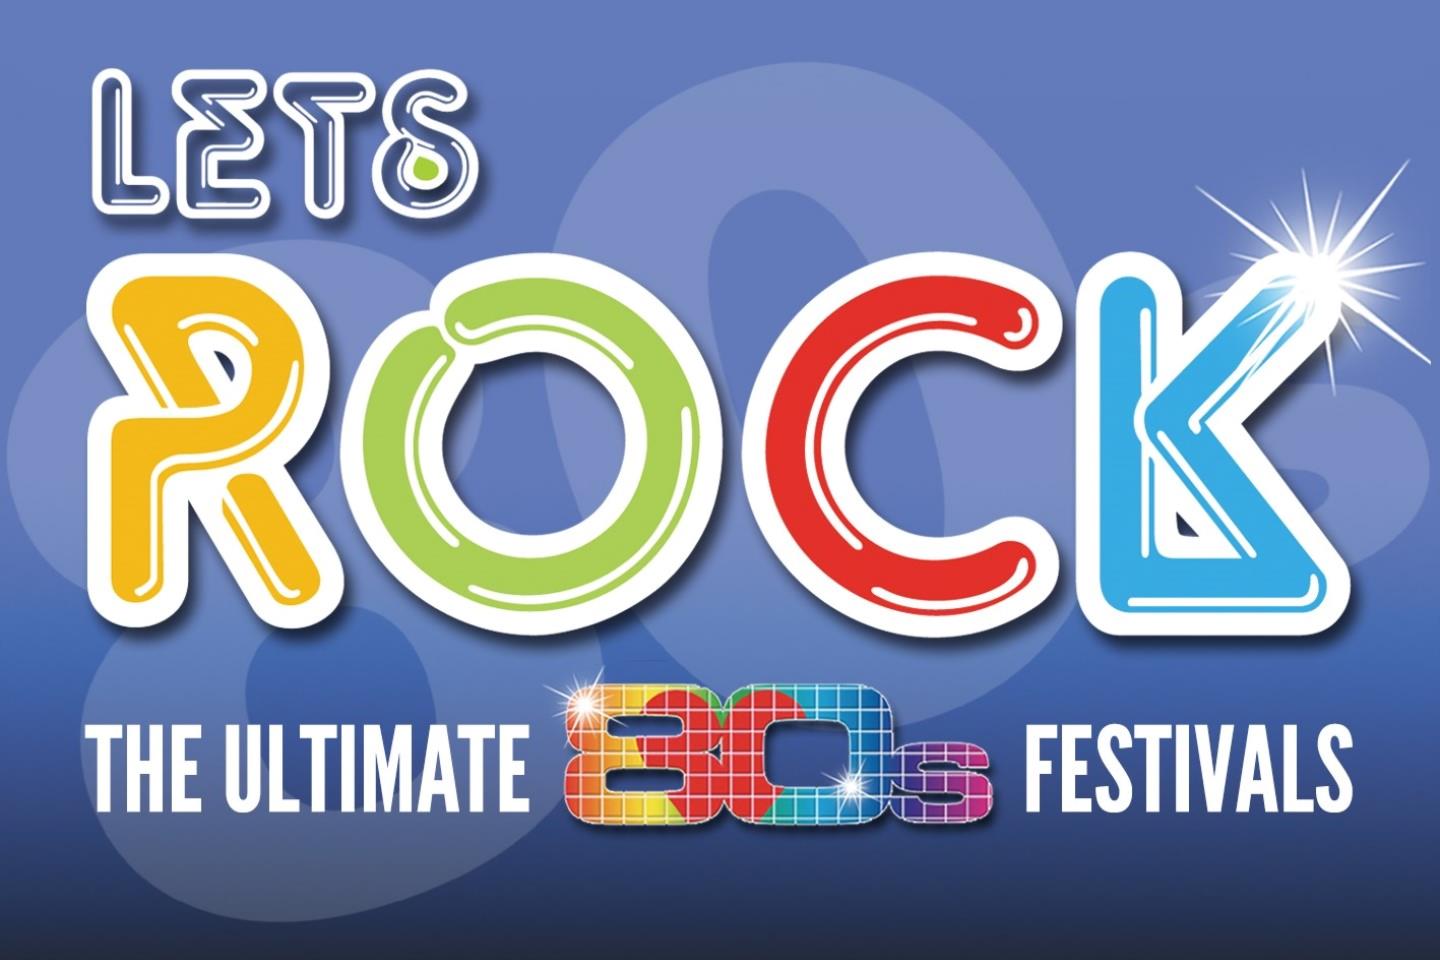 Lets Rock 2019 Tickets Lets Rock 2019 Lineup and Tickets viagogo